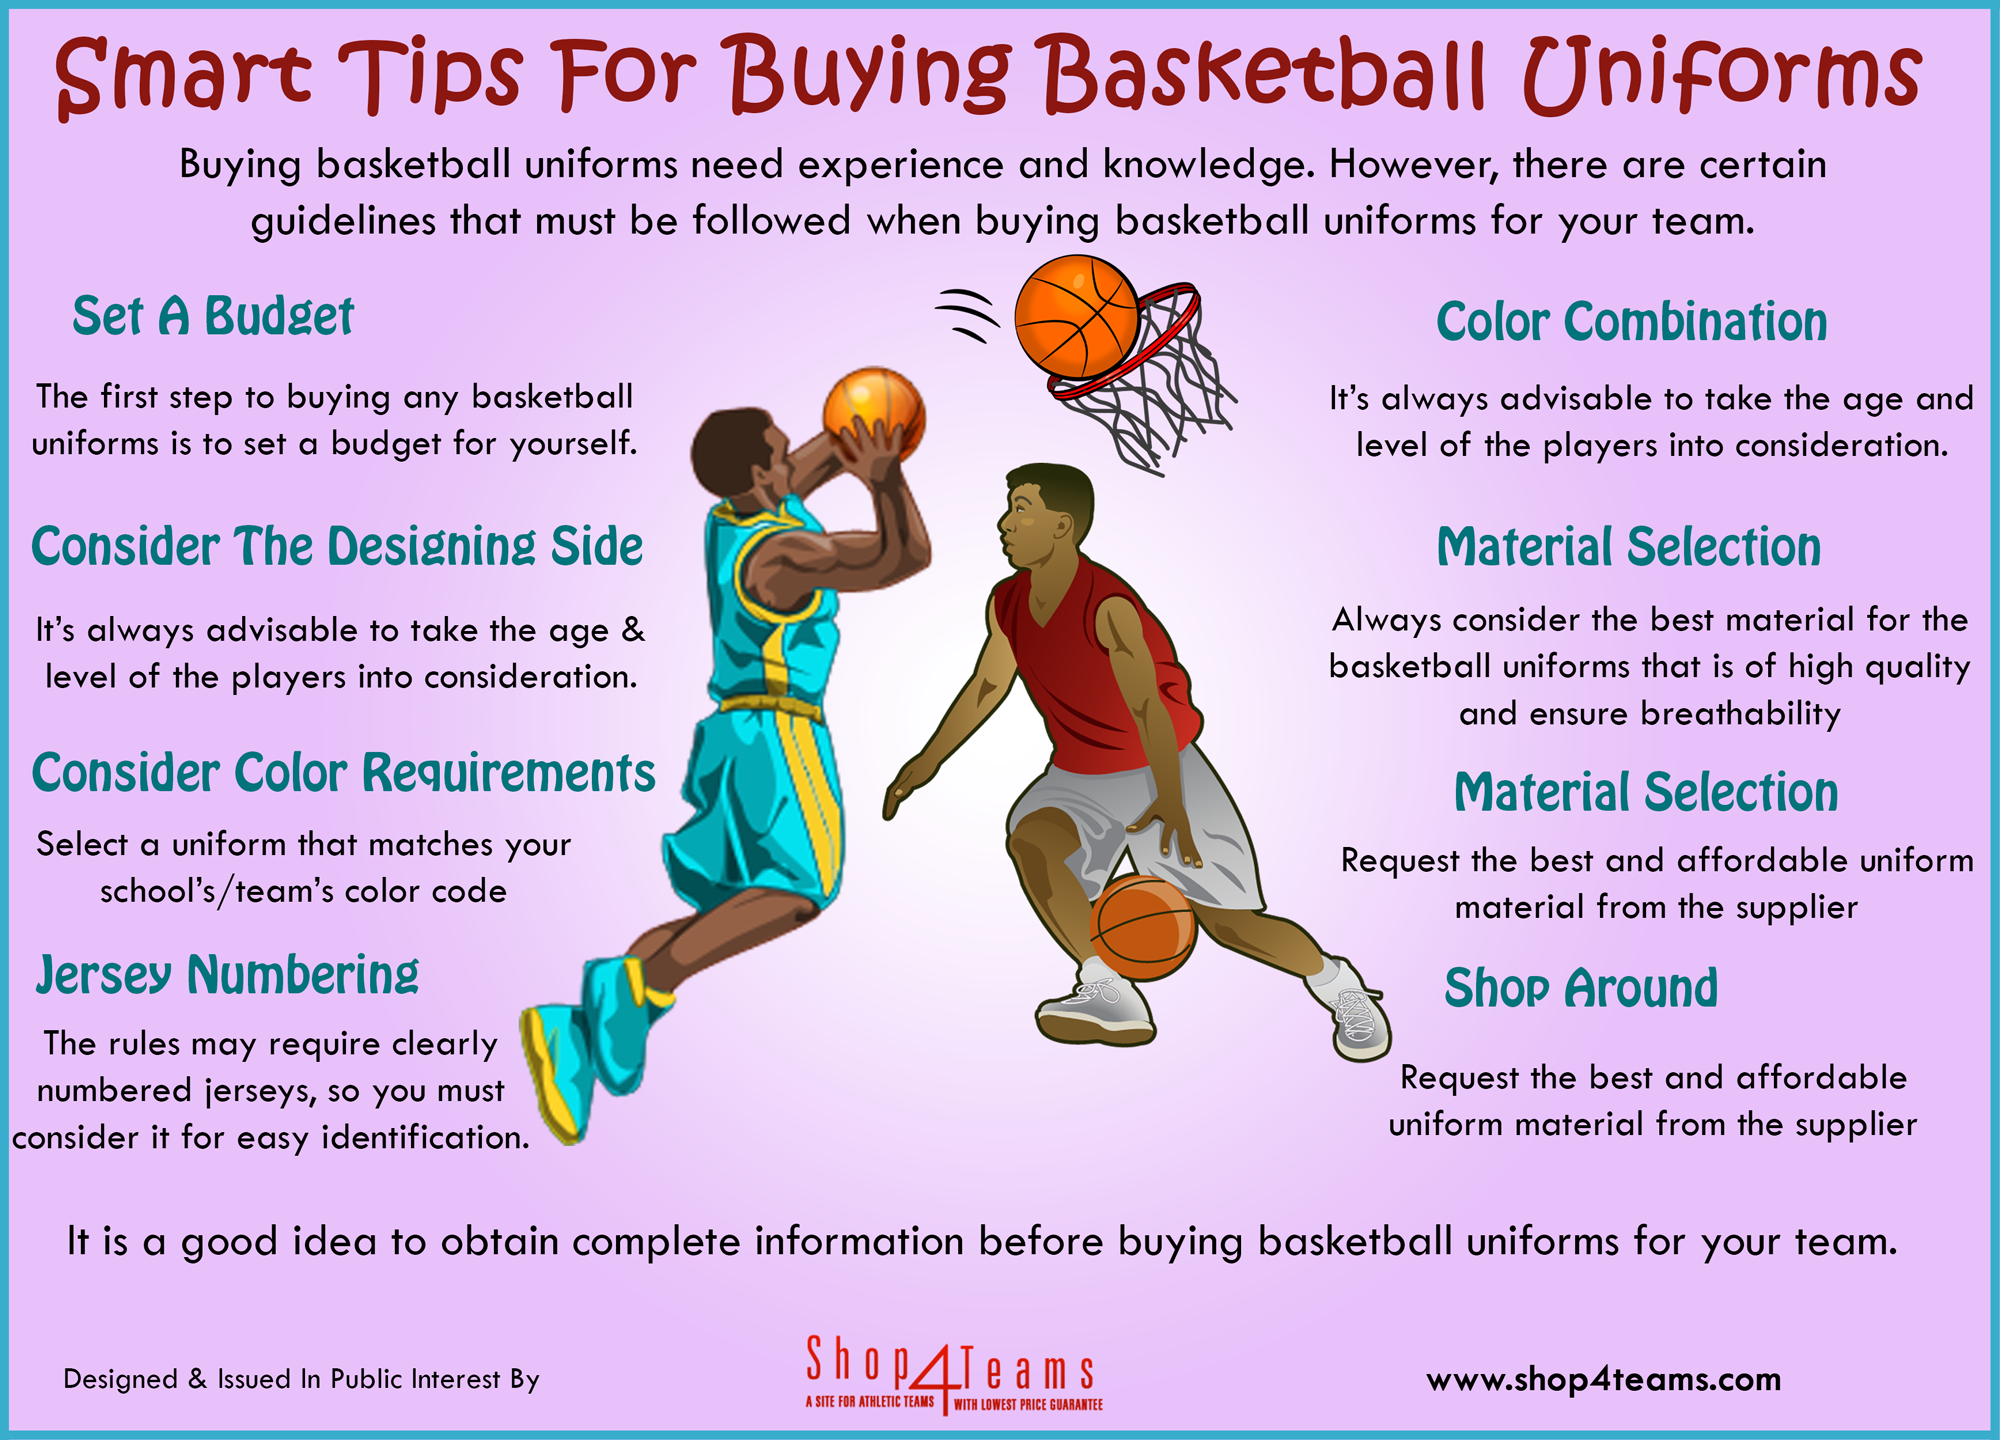 Complete Guide to Basketball Uniform Materials: What are